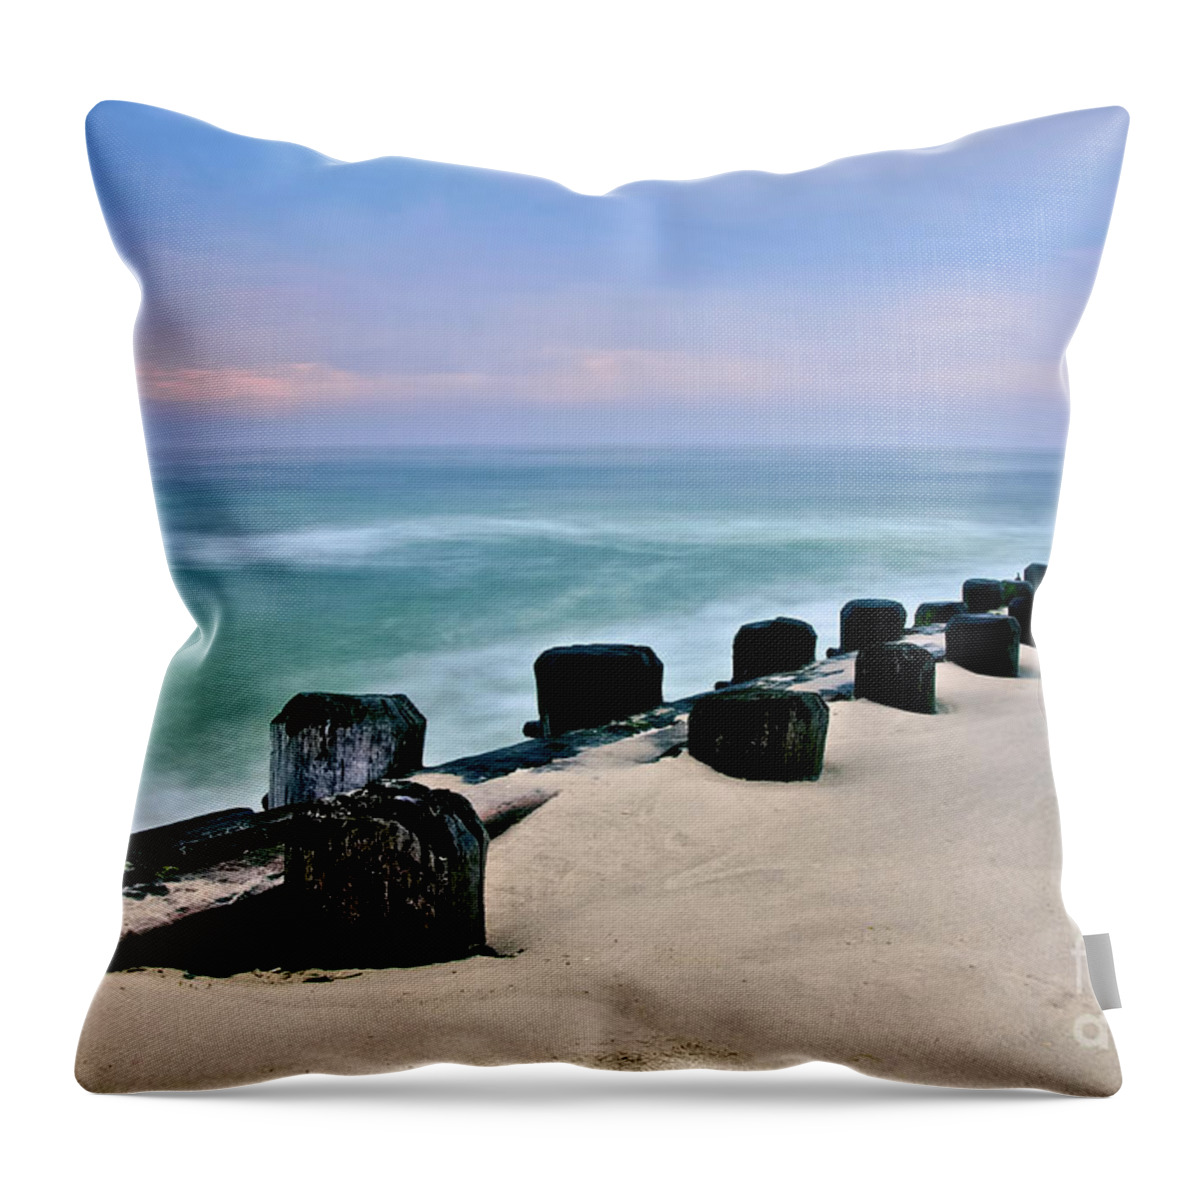 Lbi Throw Pillow featuring the photograph Pastel Waters by Mark Miller